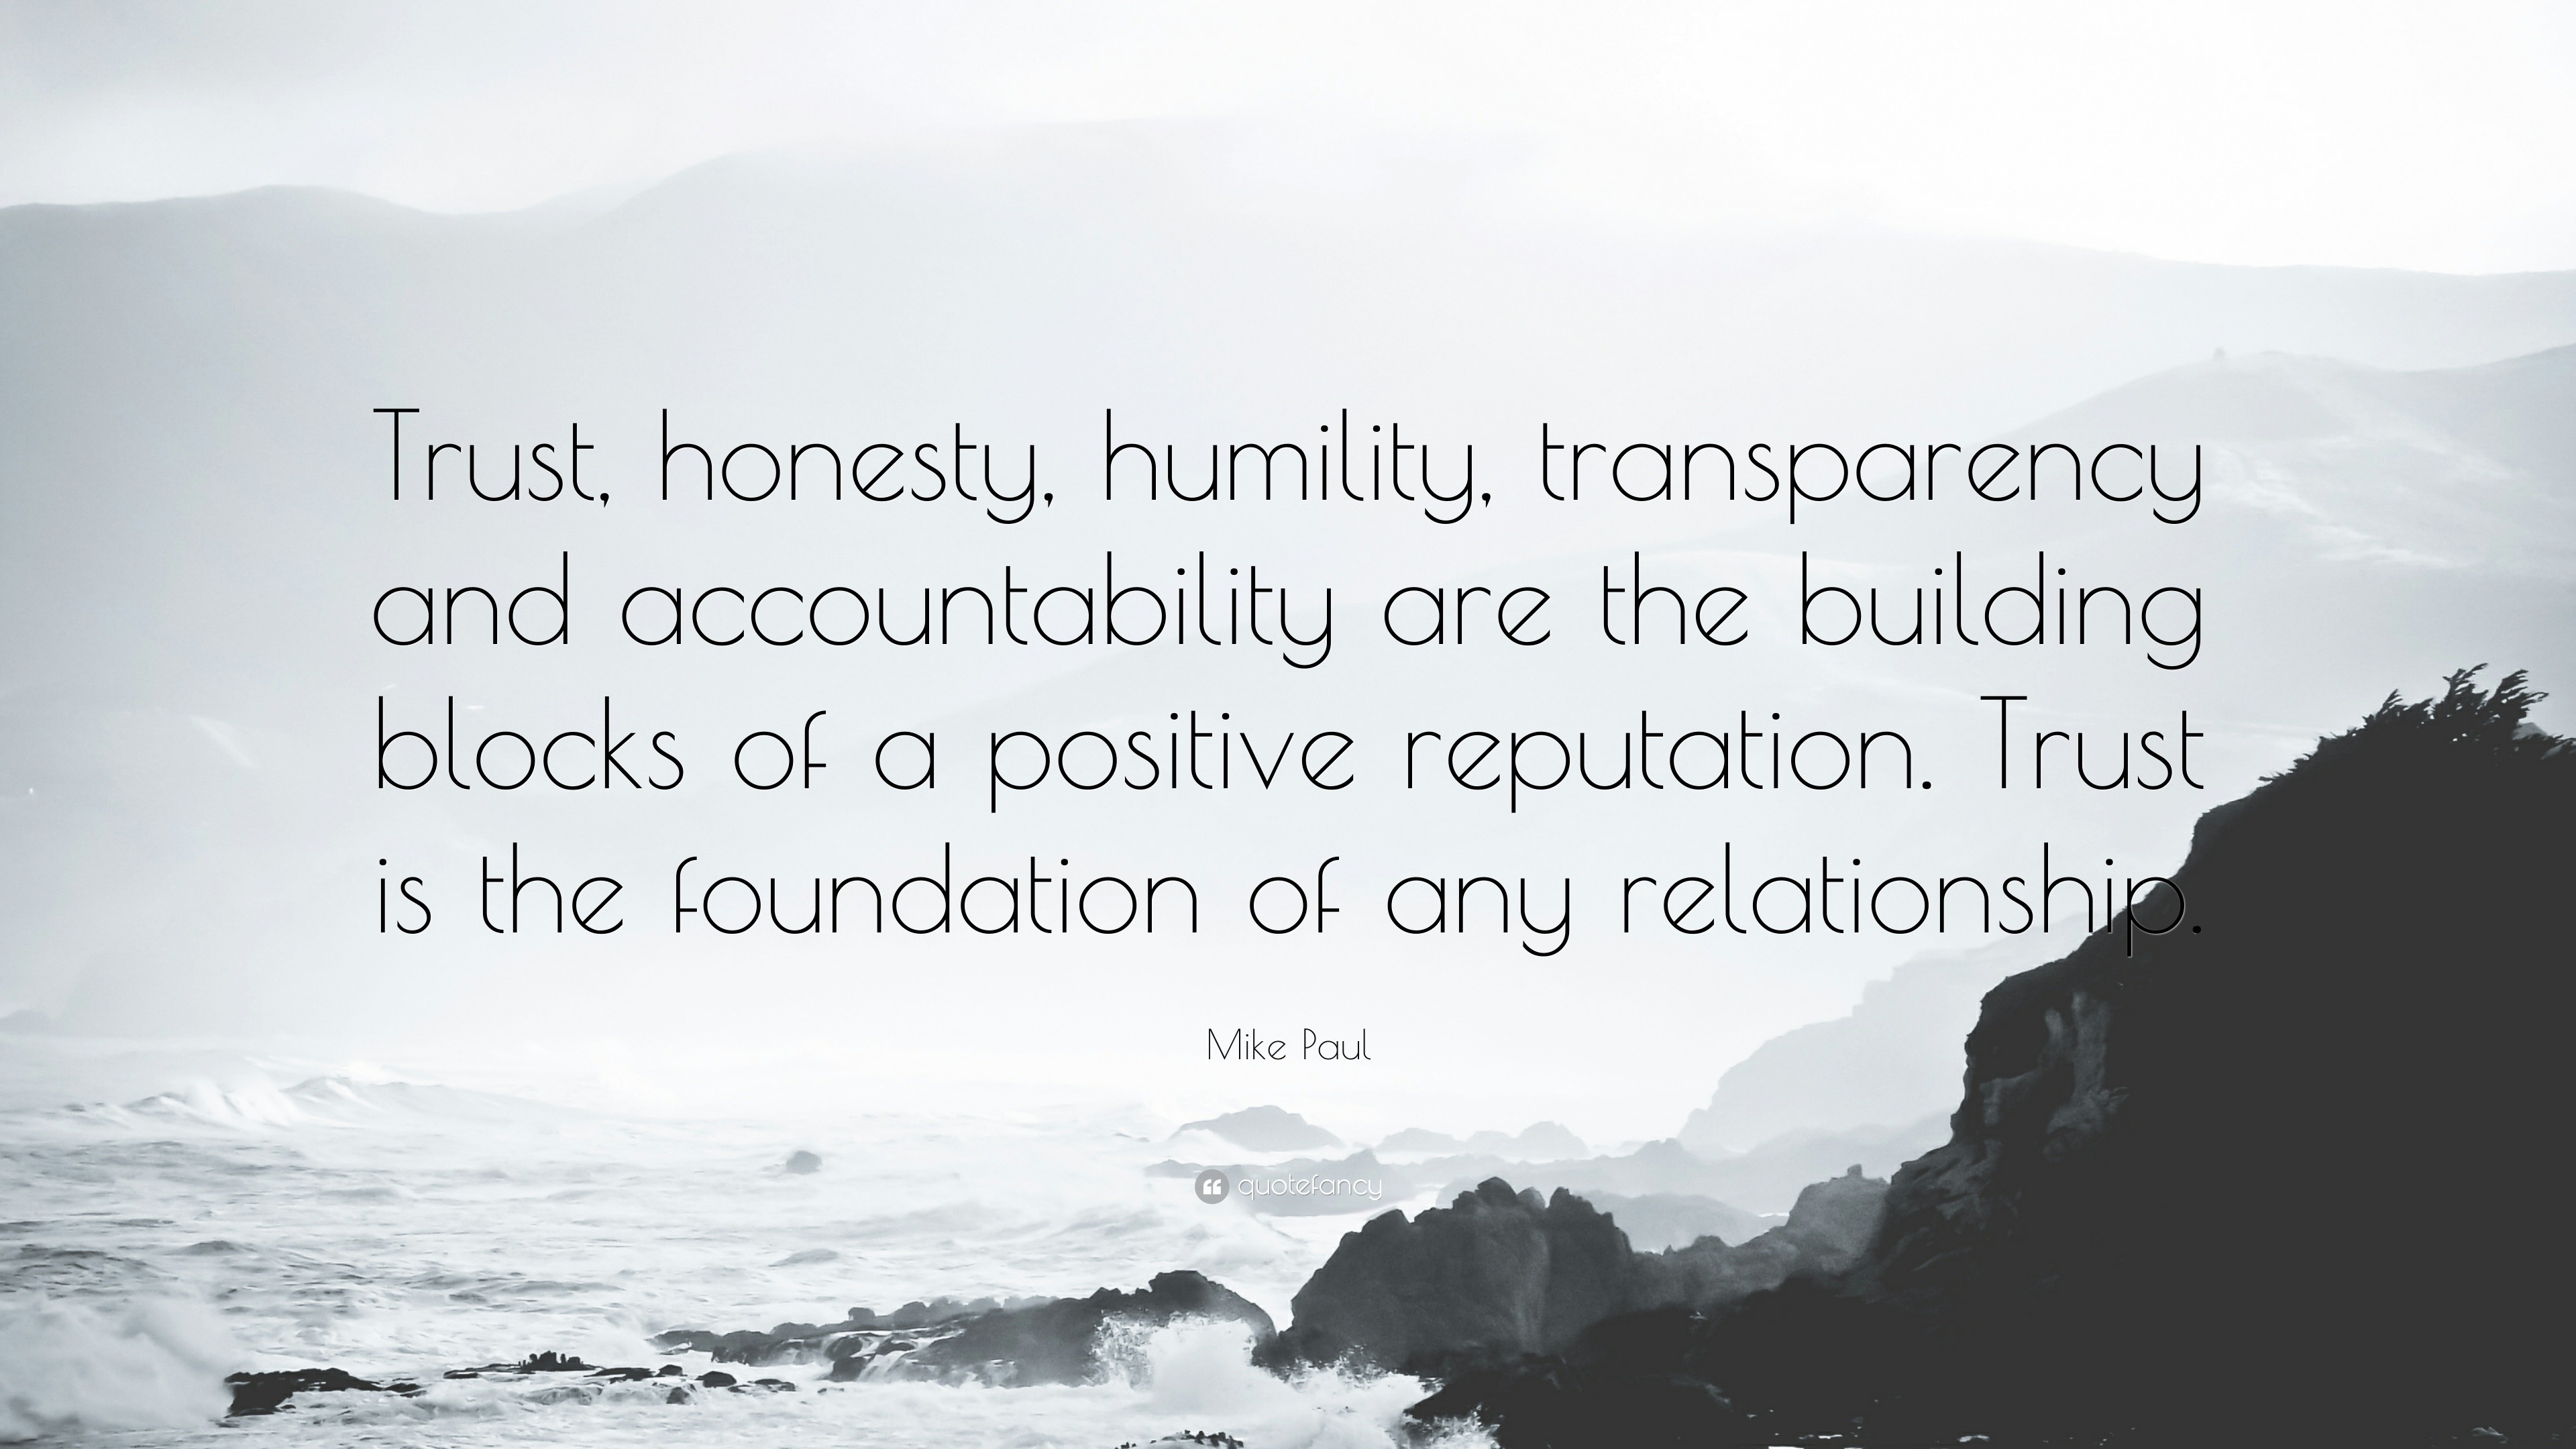 Mike Paul Quote: “Trust, honesty, humility, transparency and